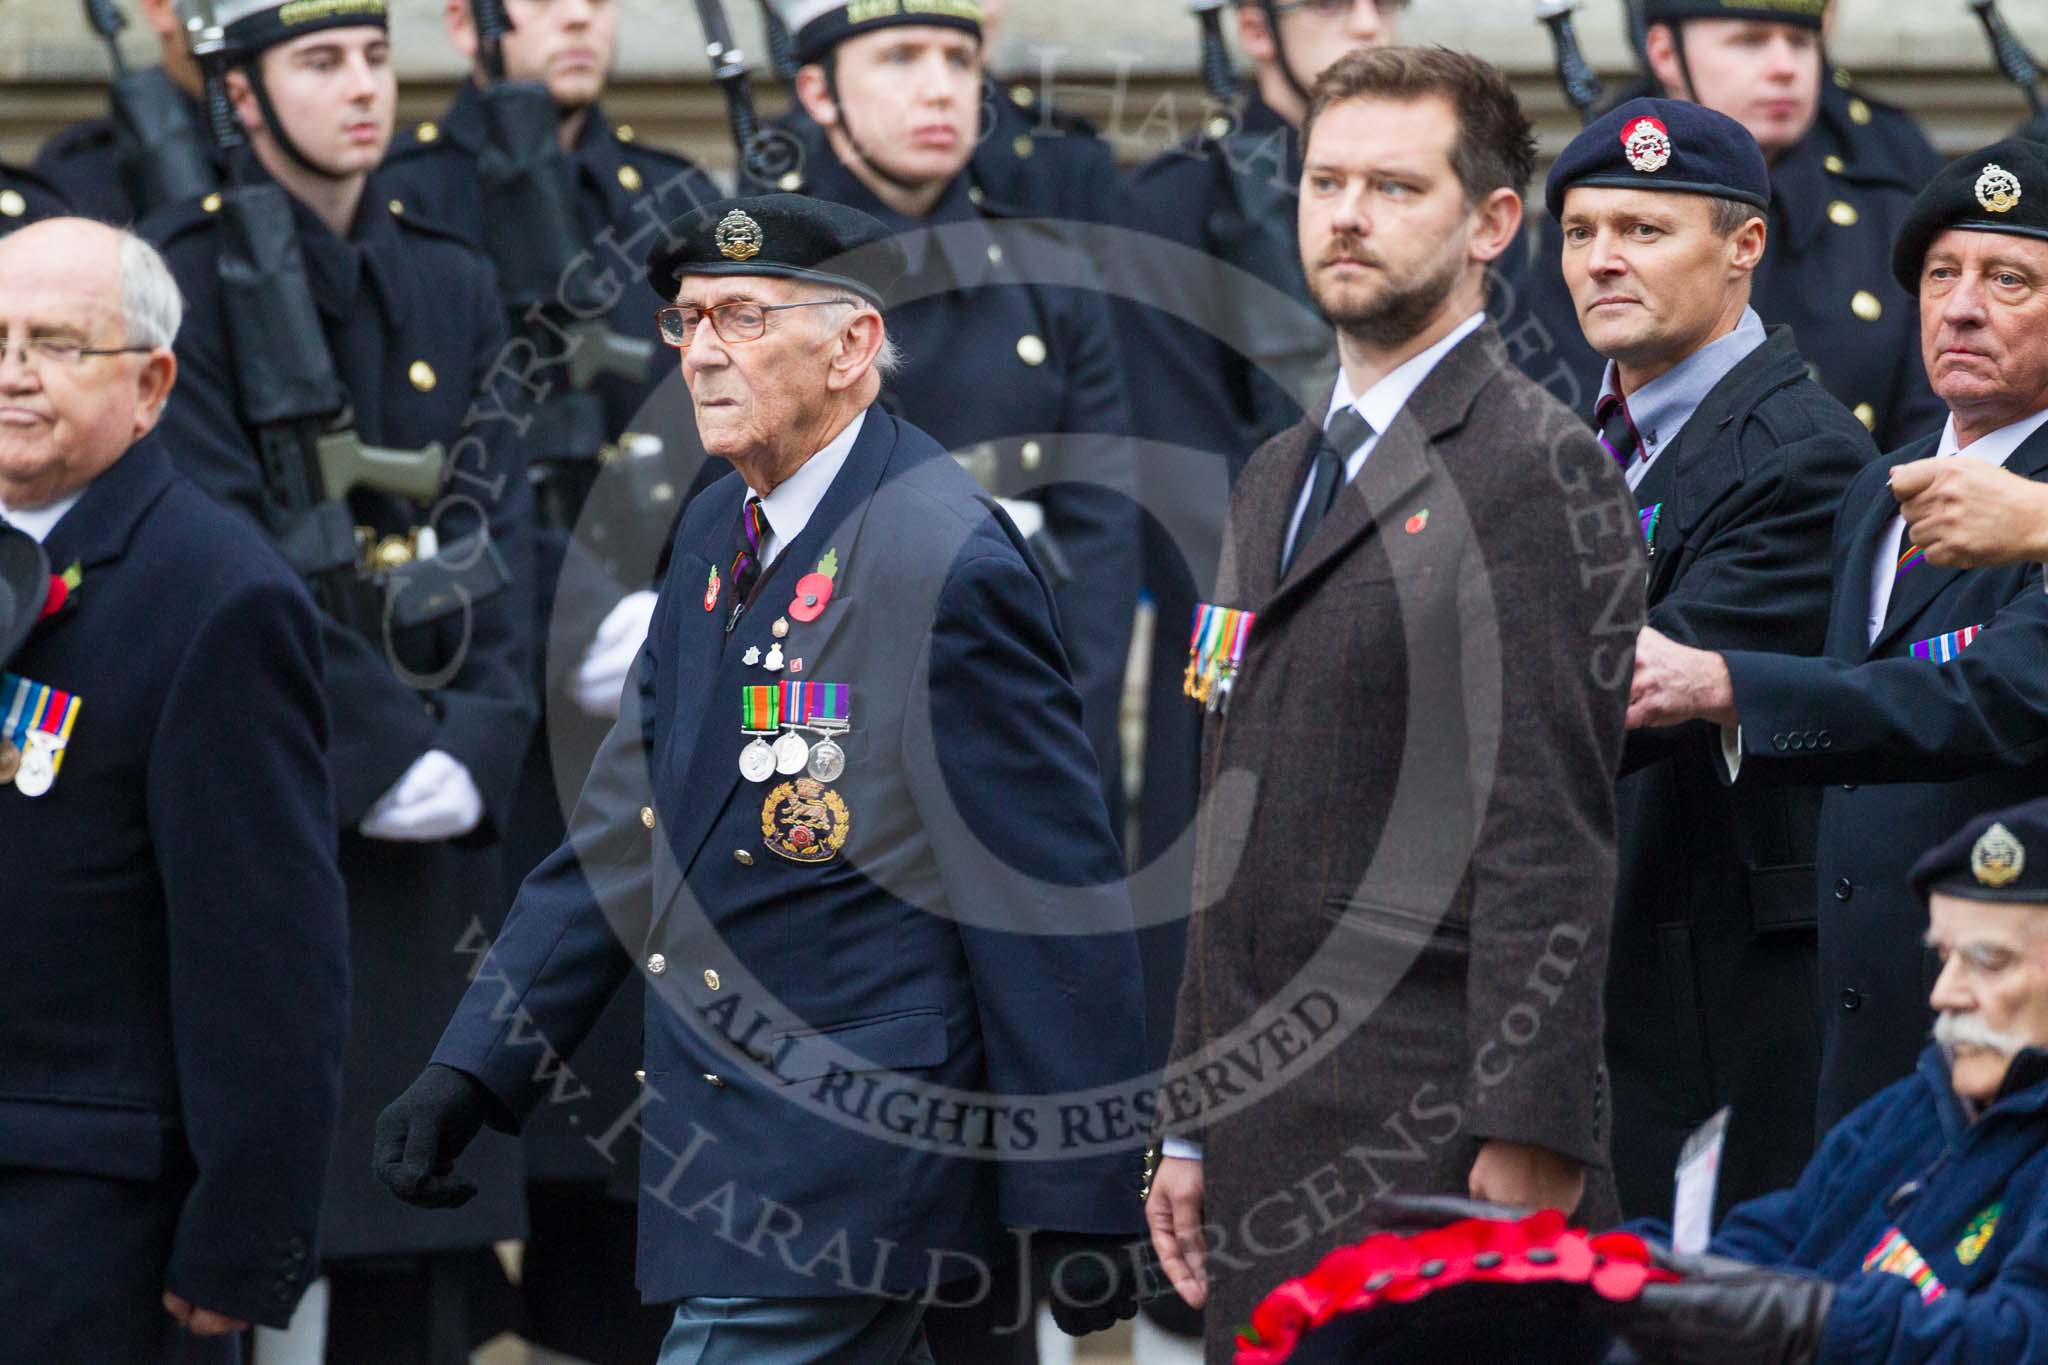 Remembrance Sunday at the Cenotaph 2015: Group A18, Royal Hampshire Regiment Comrades Association.
Cenotaph, Whitehall, London SW1,
London,
Greater London,
United Kingdom,
on 08 November 2015 at 12:12, image #1312